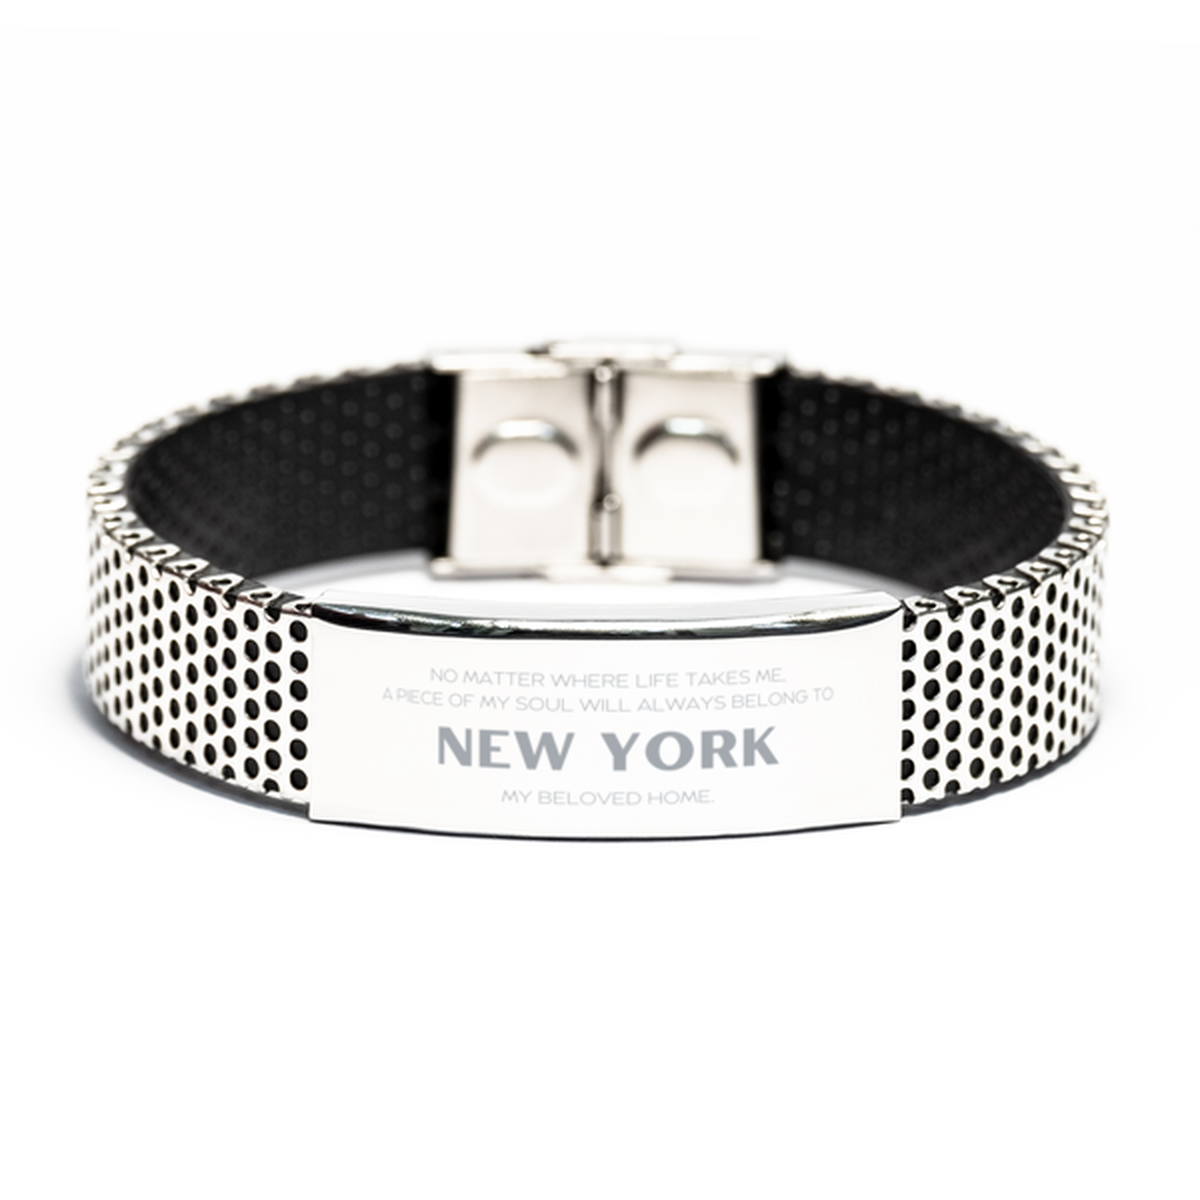 Love New York State Gifts, My soul will always belong to New York, Proud Stainless Steel Bracelet, Birthday Unique Gifts For New York Men, Women, Friends